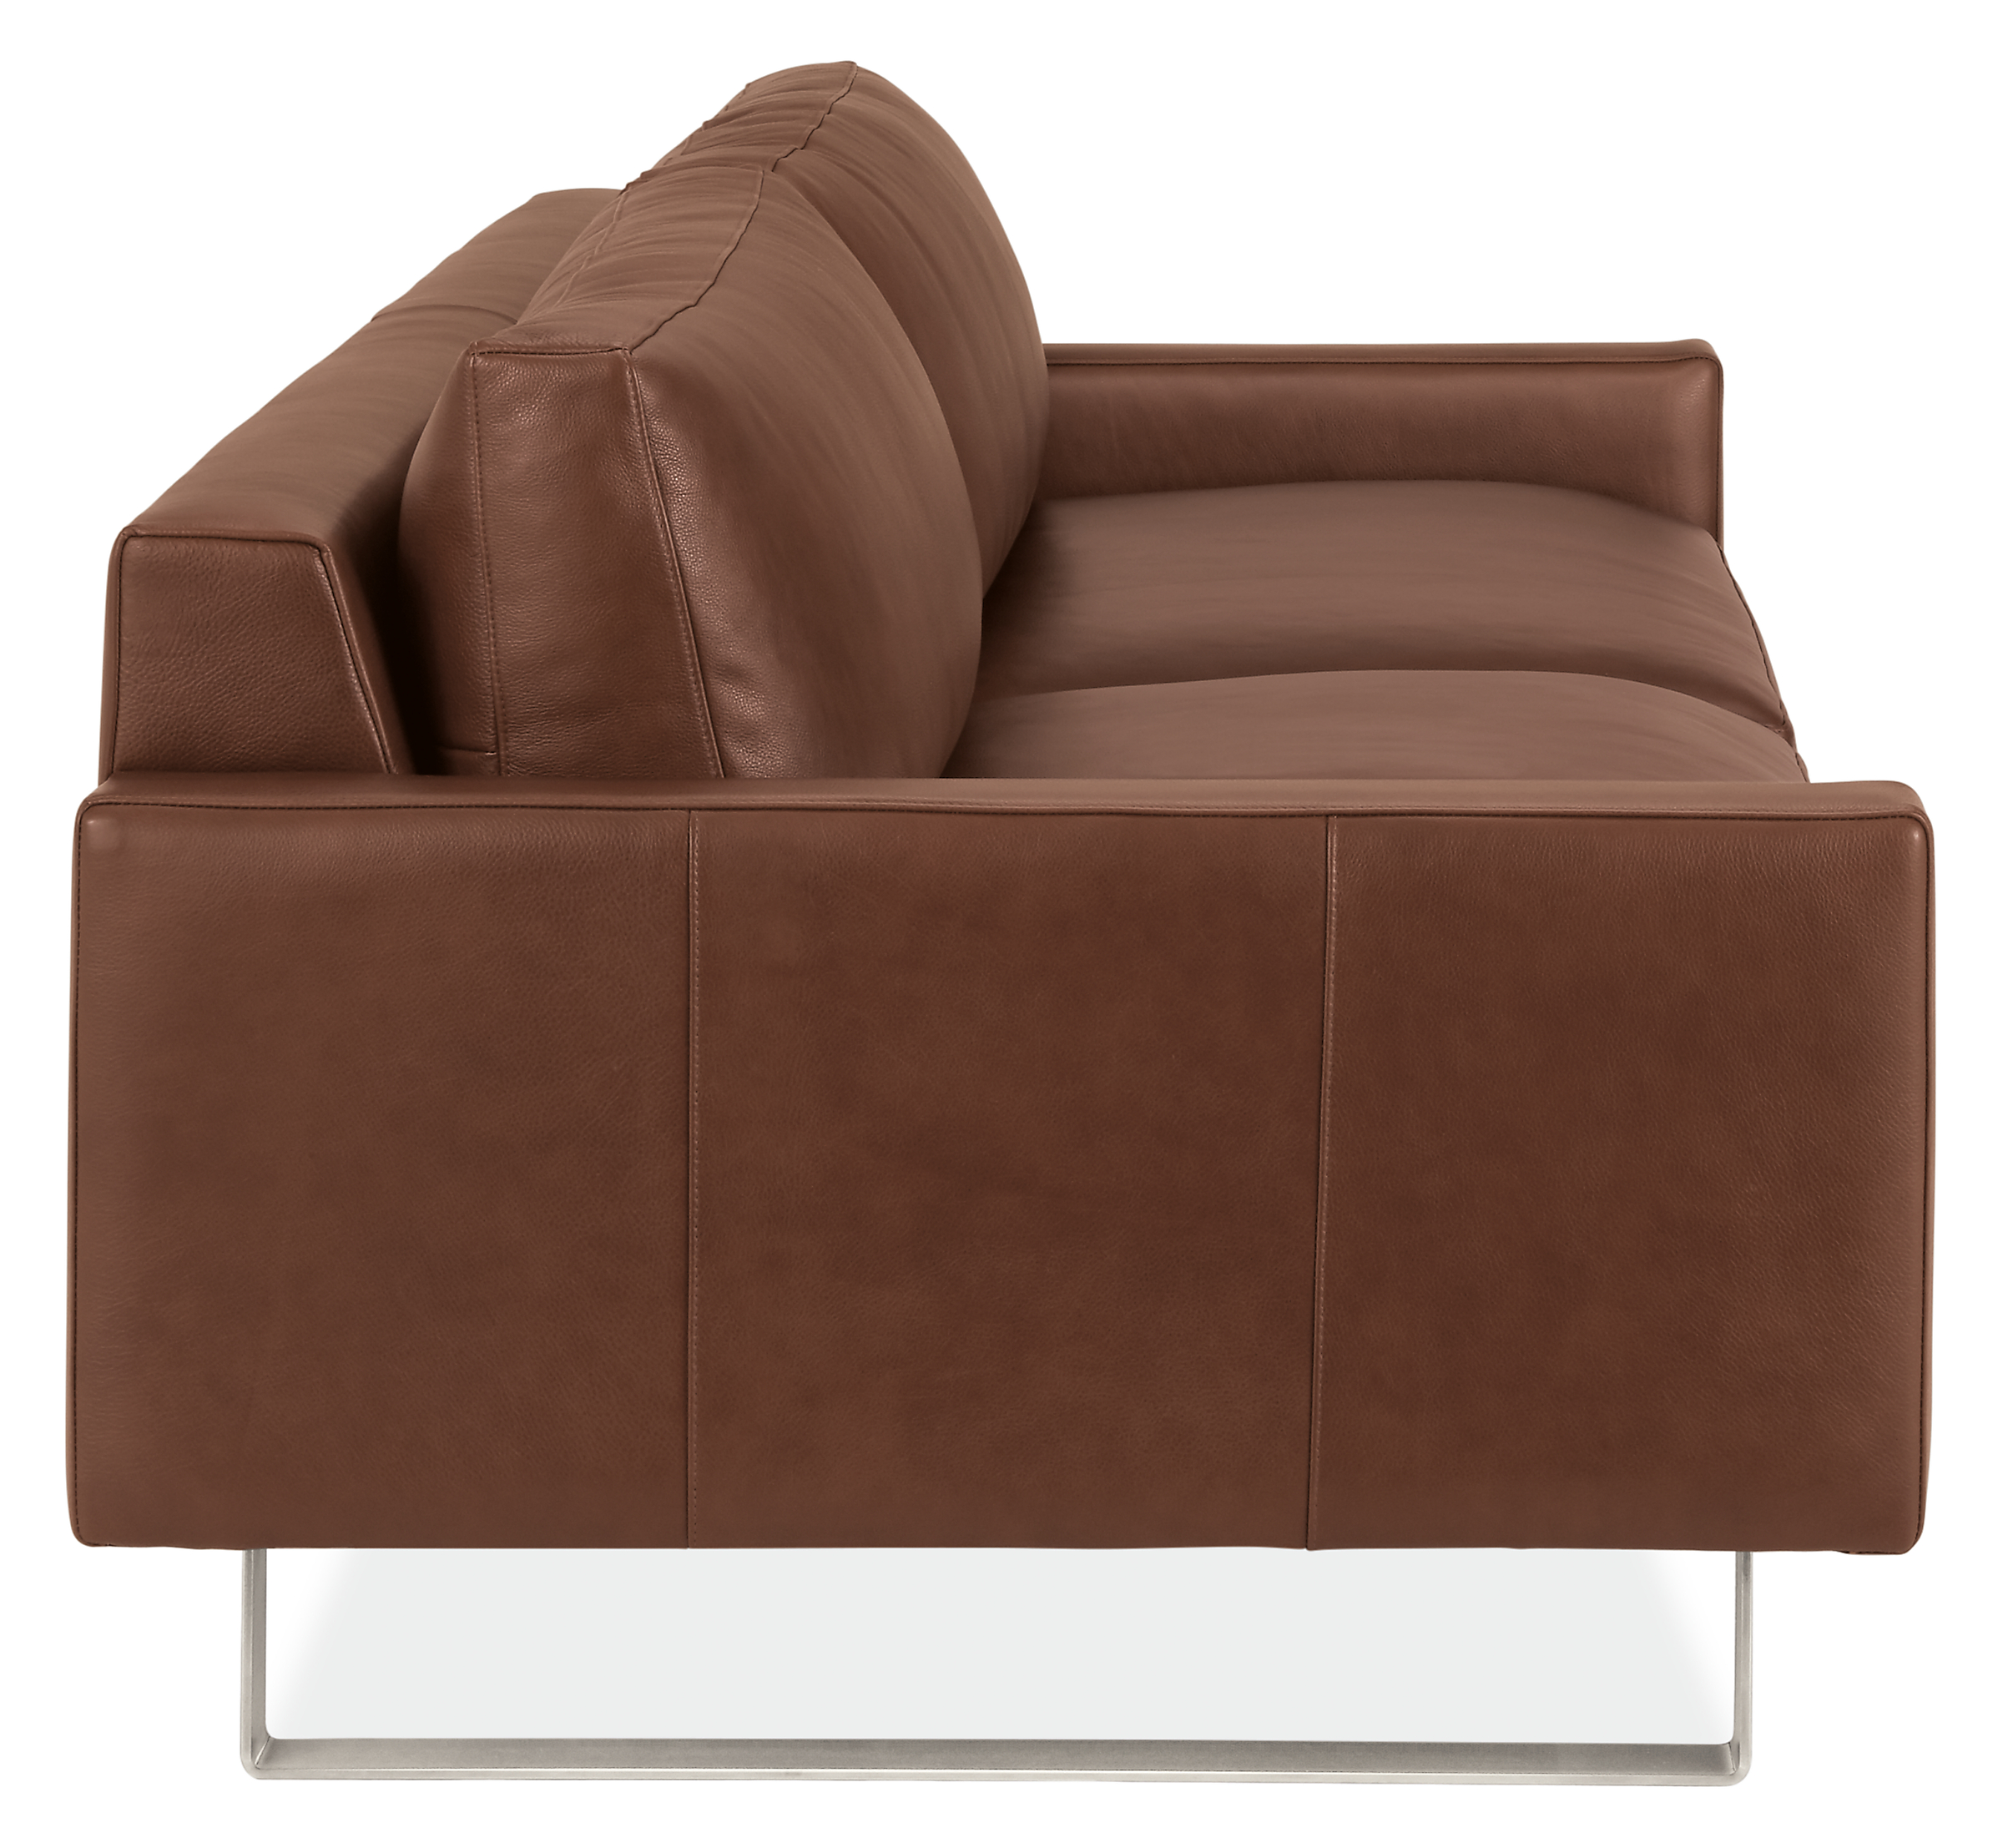 Side view of Pierson 102 Sofa in Lecco Leather with Metal Base.